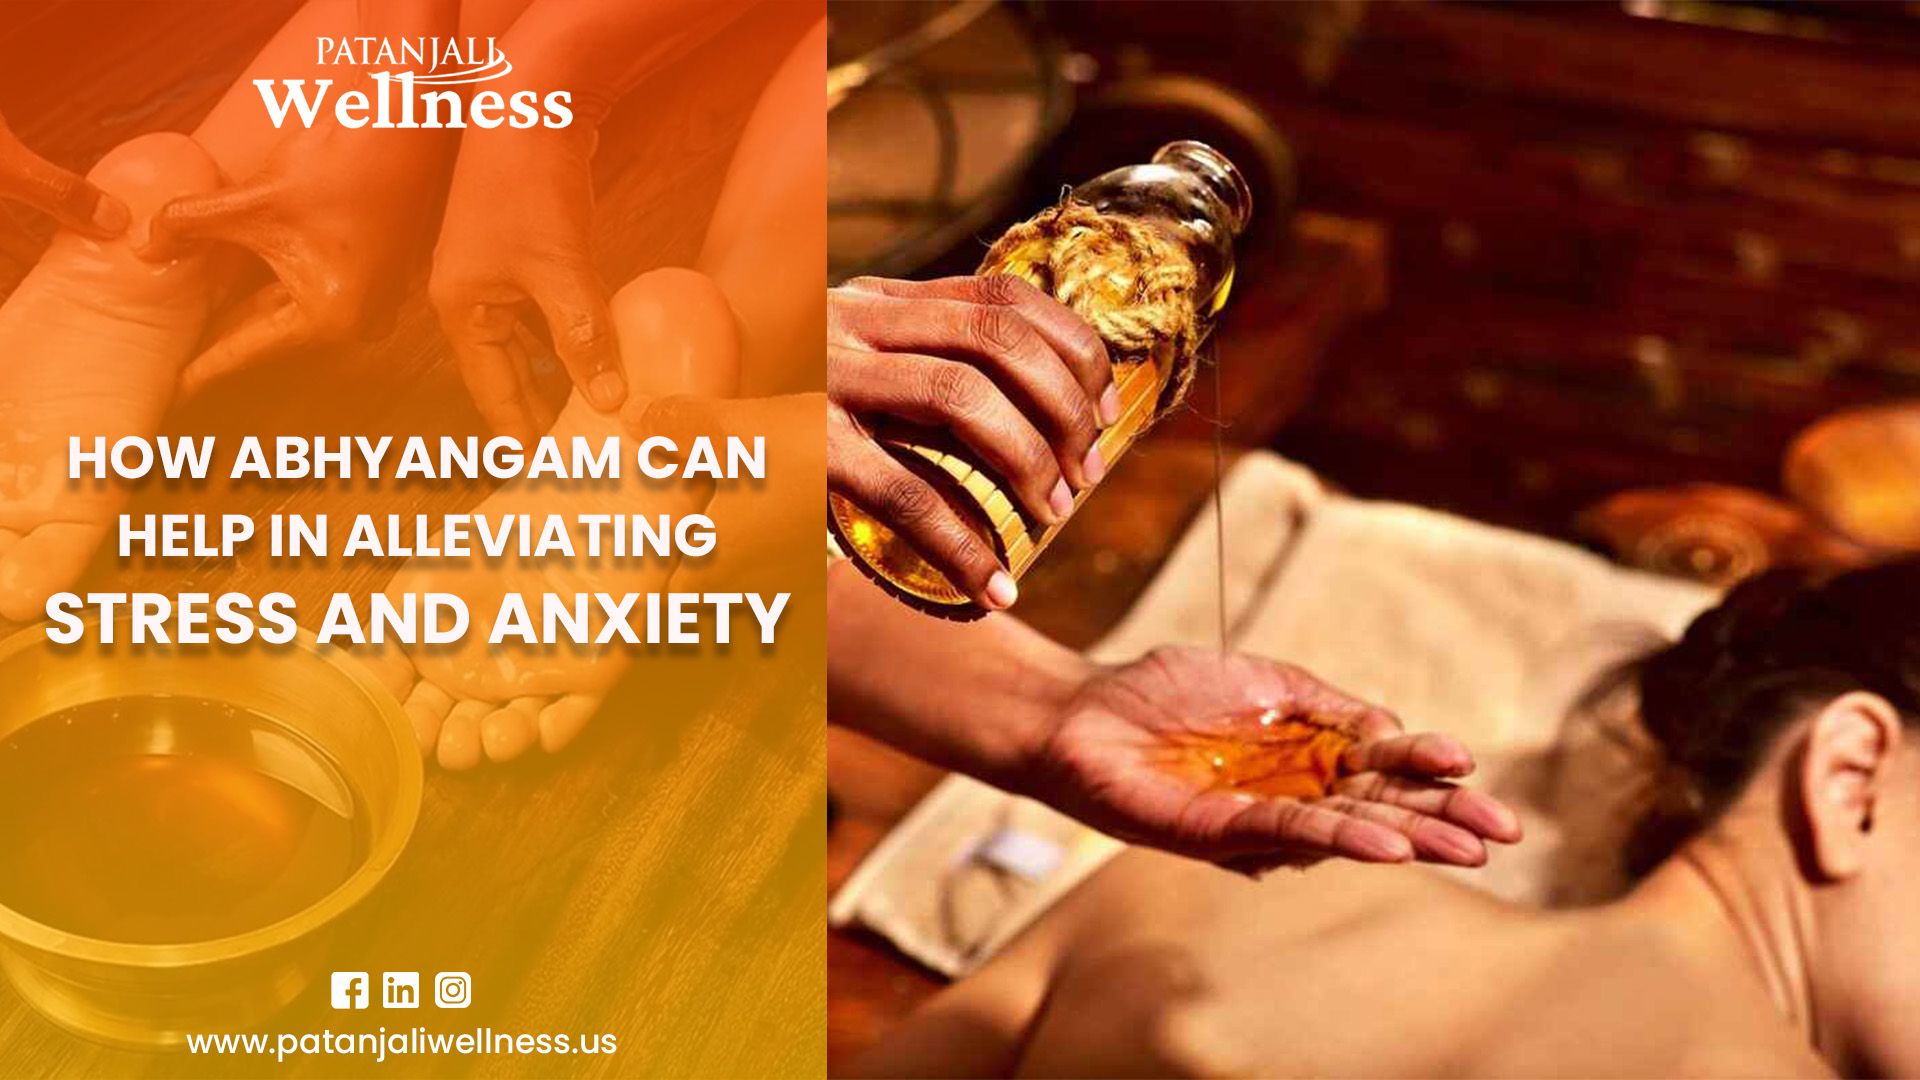 How Abhyangam Can Help in Alleviating Stress and Anxiety